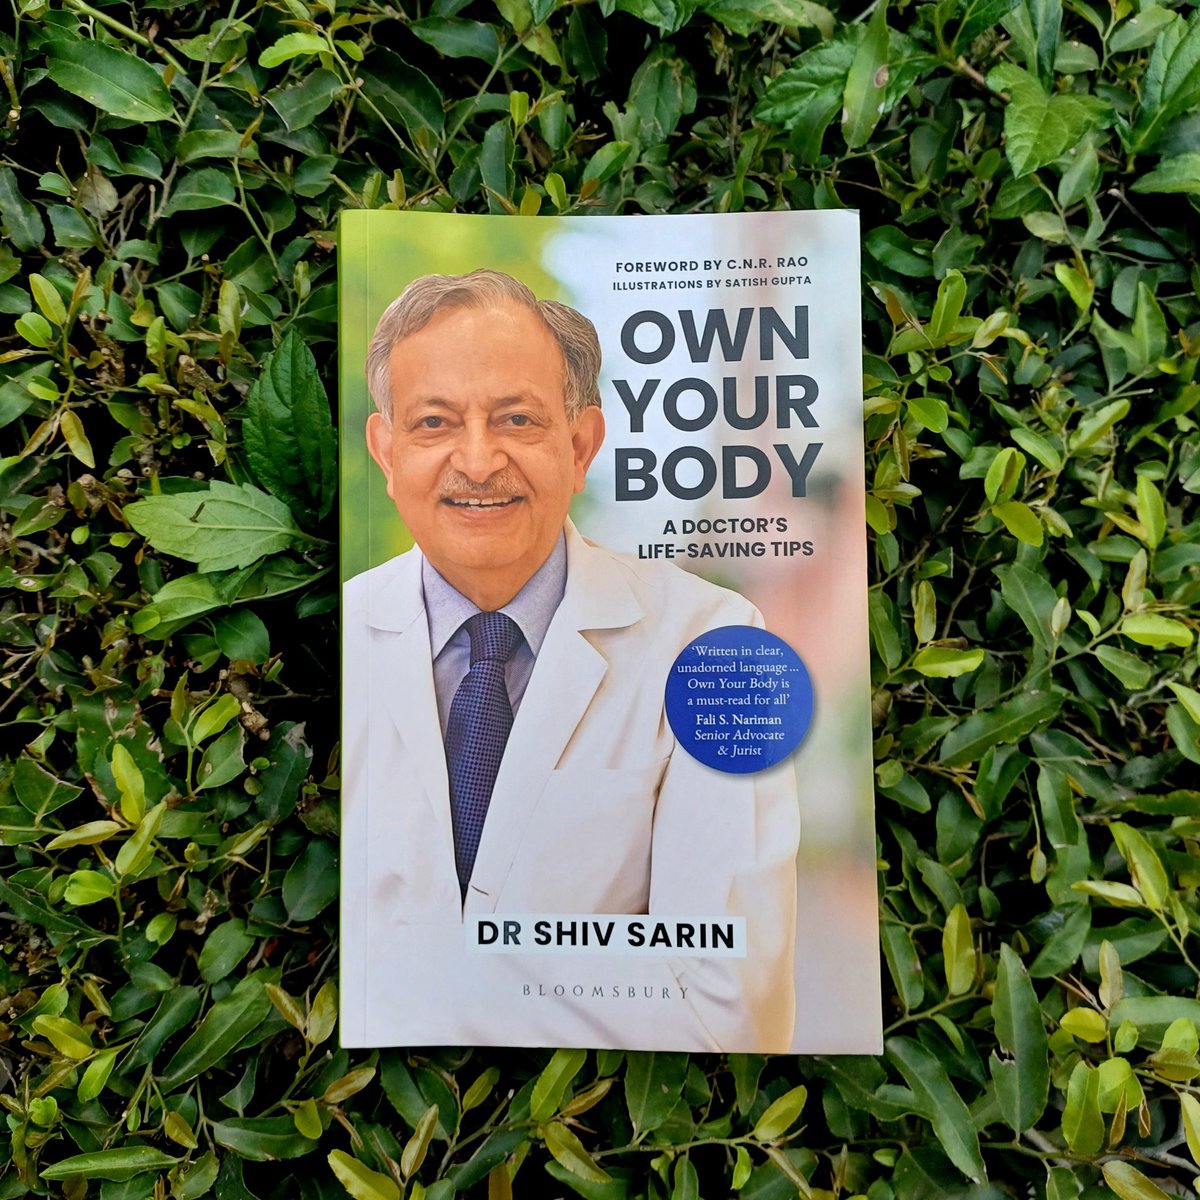 #MothersDayGifting For the woman who gave us this life, gift her a blueprint to living it healthier & longer. This Mother's Day, gift your #mother the invaluable wisdom in 'Own Your Body' by Dr. Shiv Sarin-an empowering journey through our incredible bodies & how to care for them